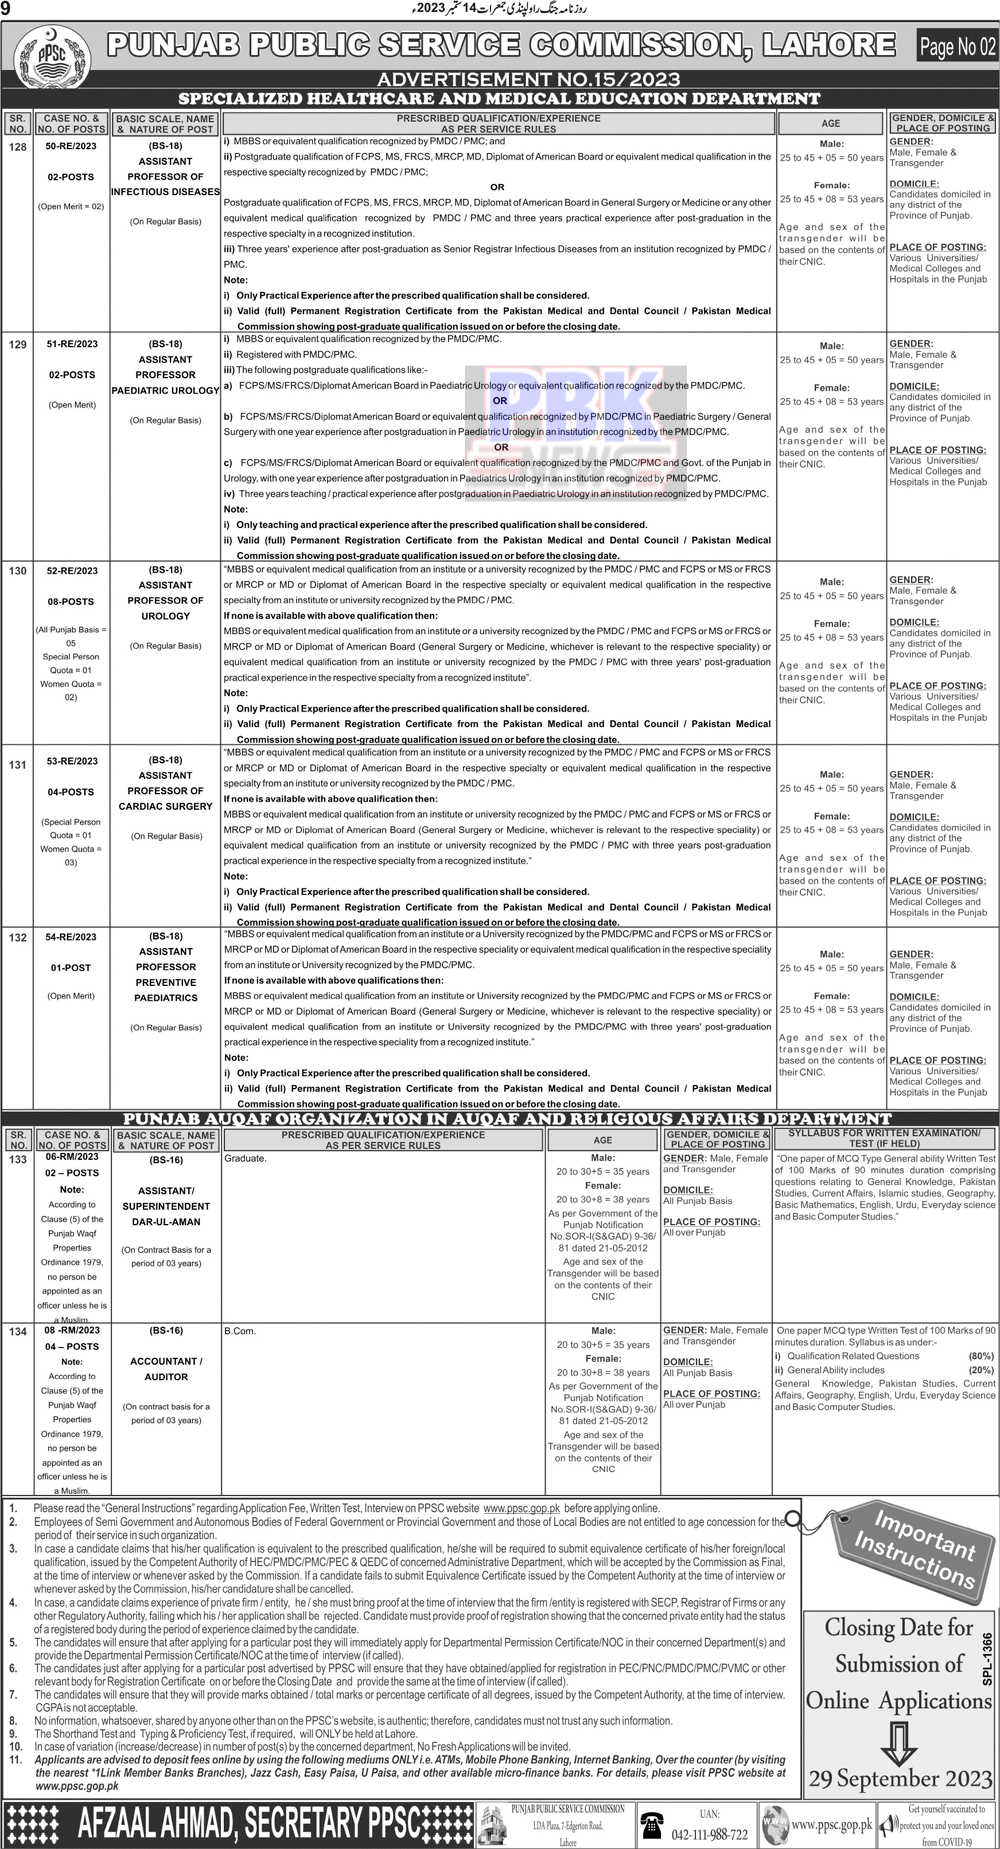 PPSC Jobs Ad No. 15 for 2023